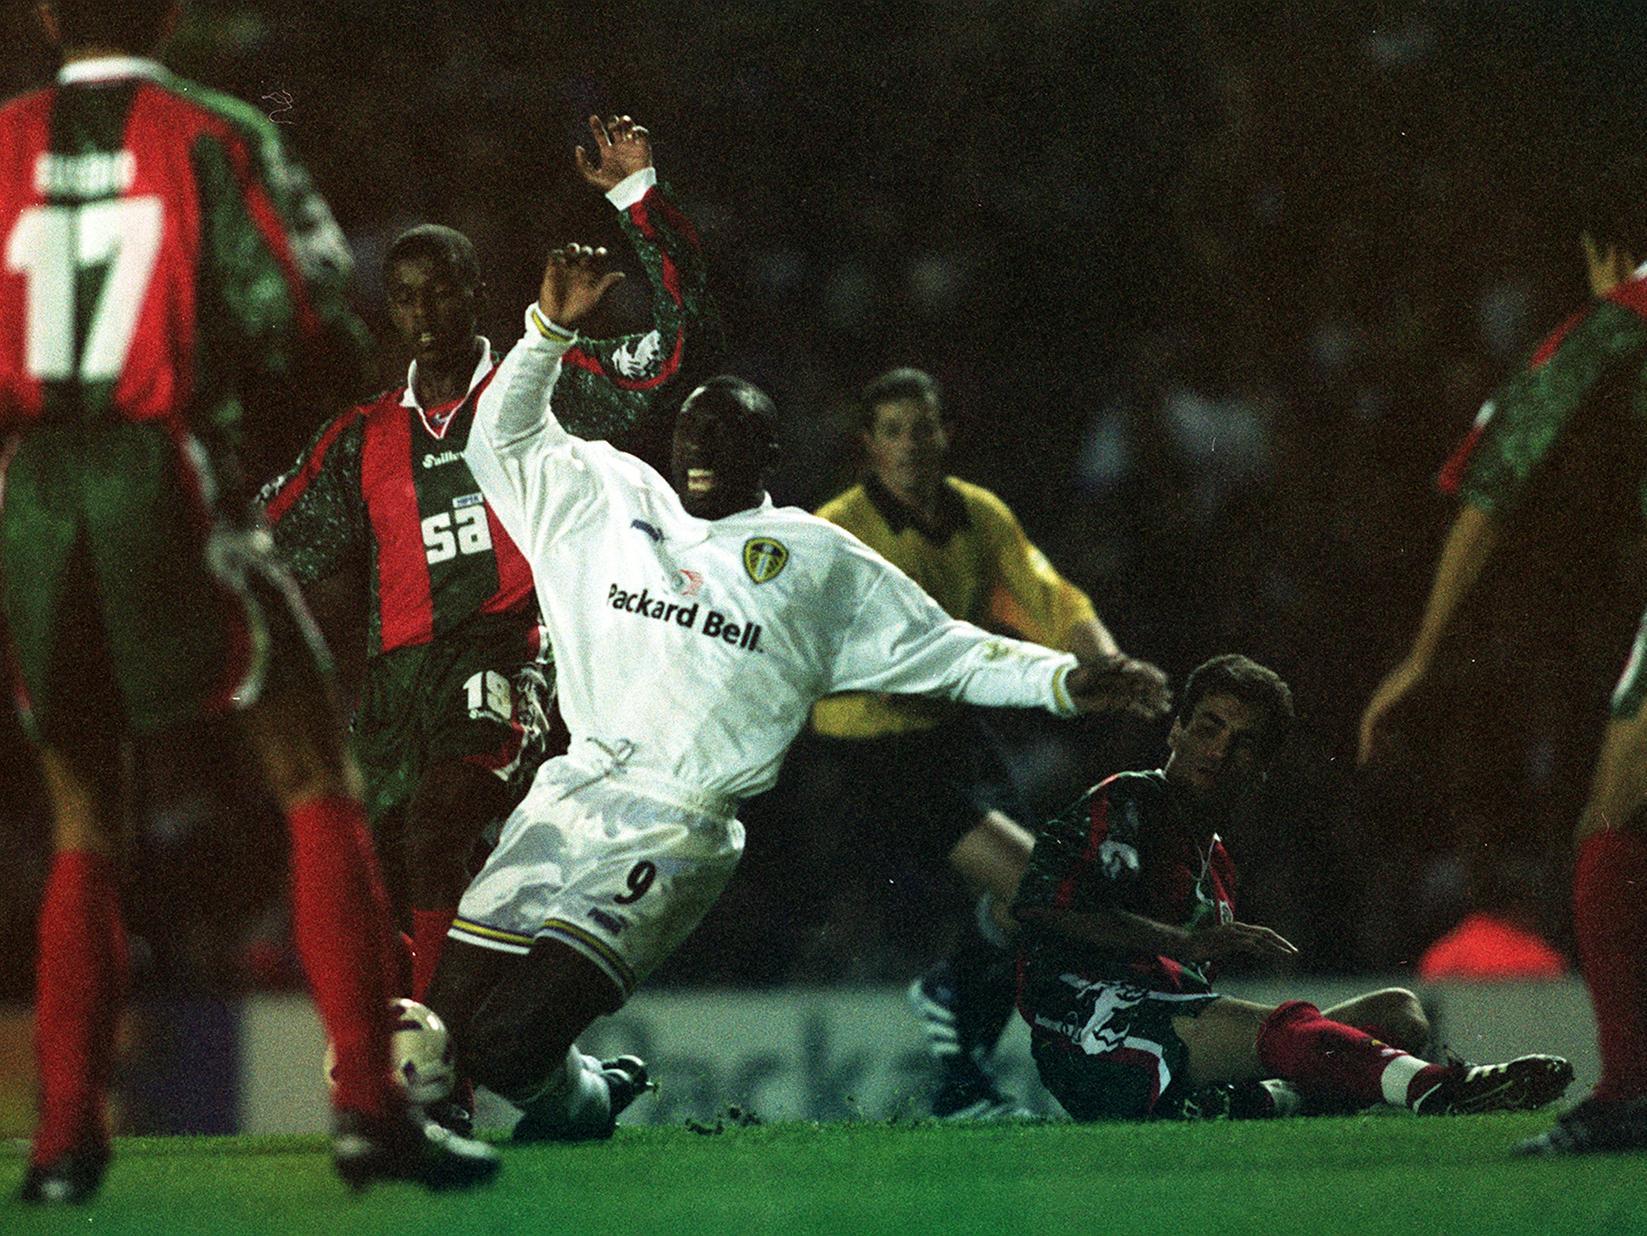 Jimmy Floyd Hasselbaink is brought down on the edge of the box. He scored from the free kick to give the Whites the win in front of 38,000 at Elland Road.